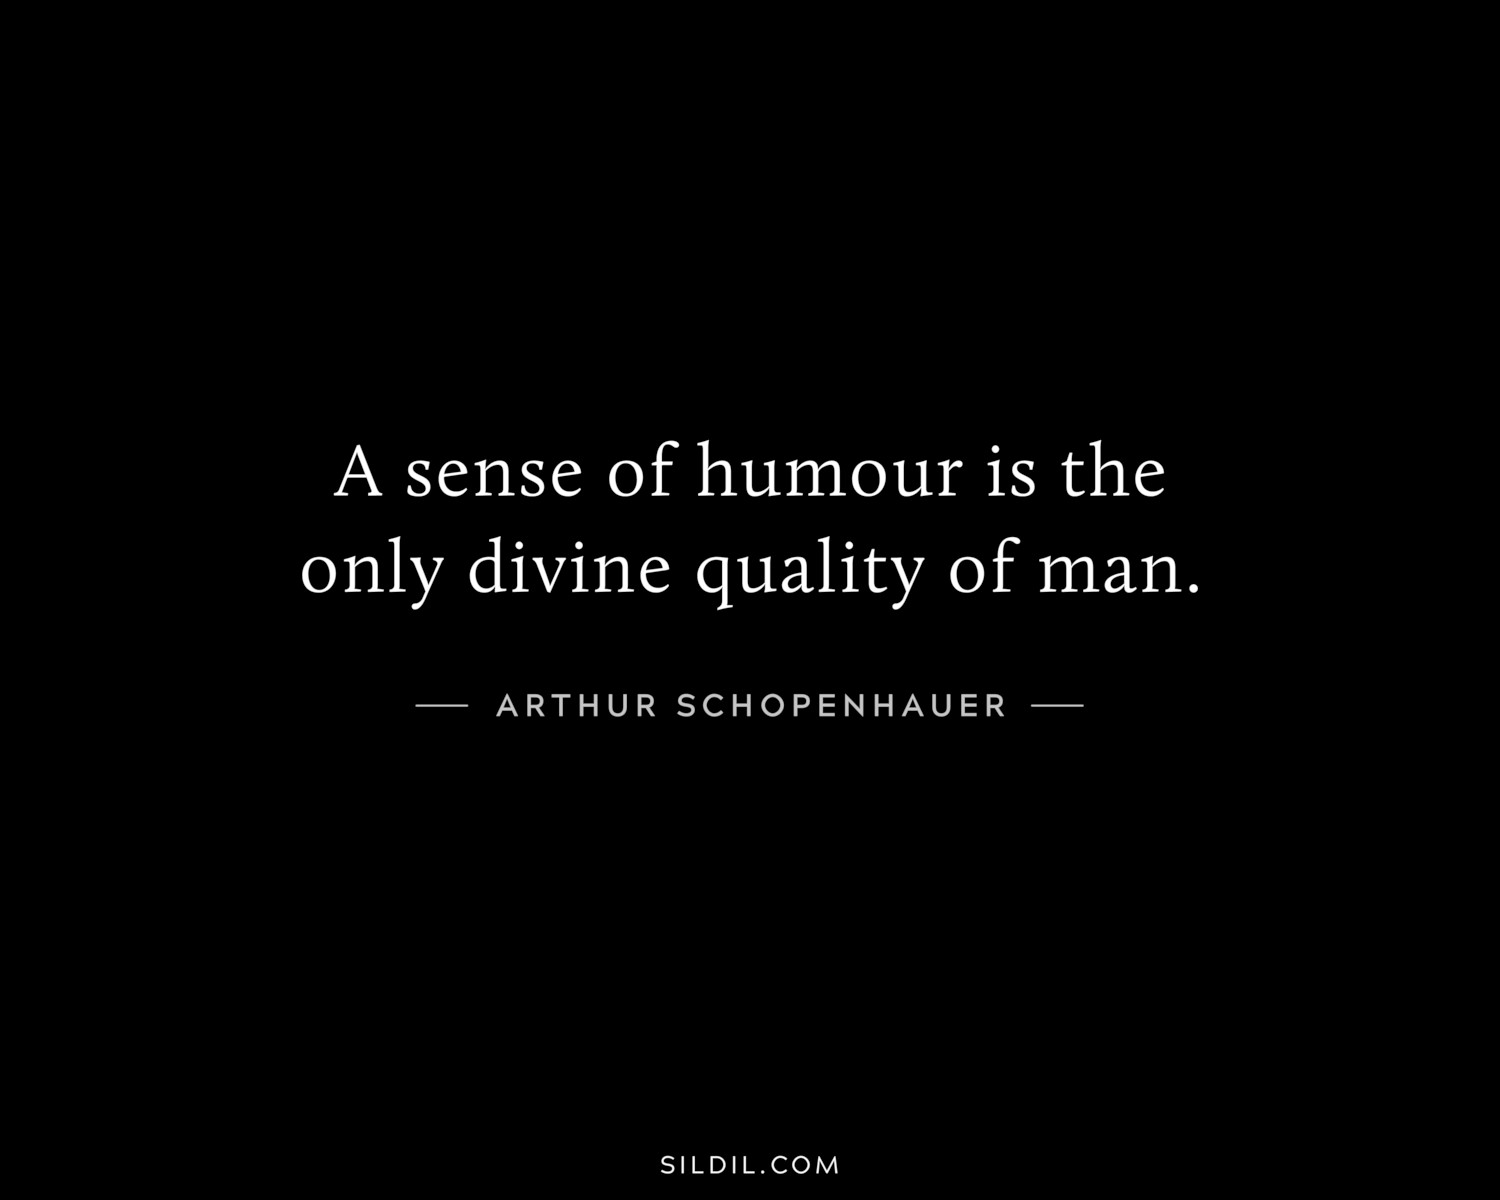 A sense of humour is the only divine quality of man.